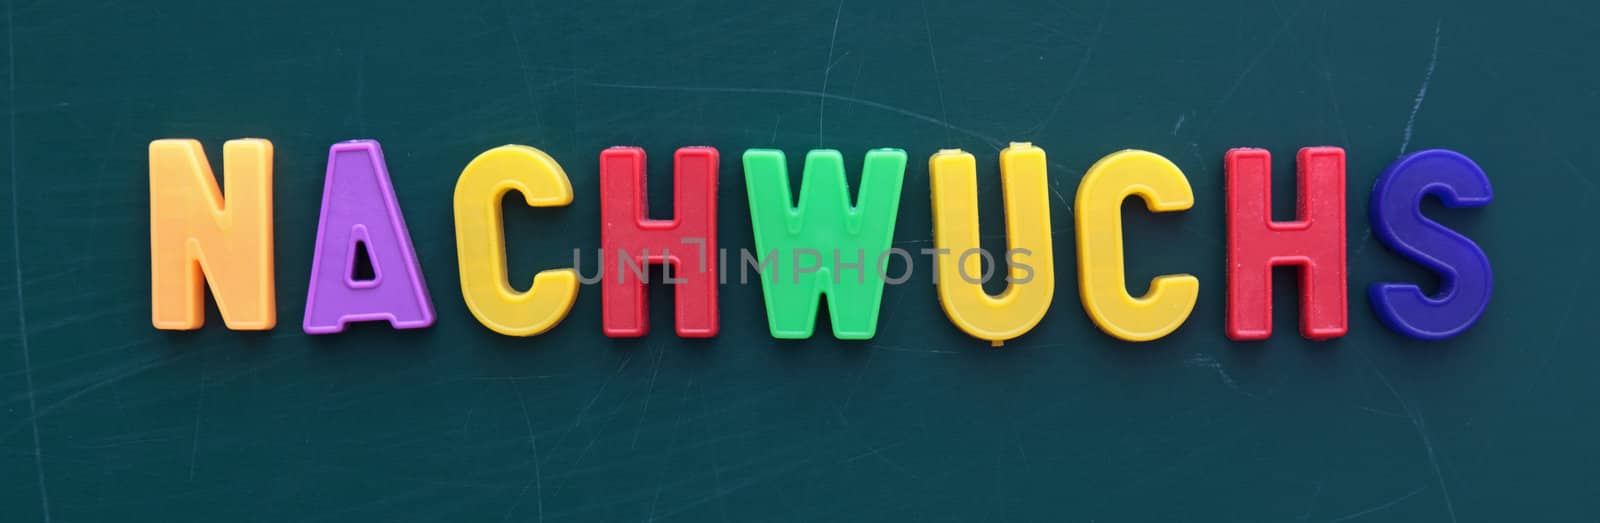 The german term for offspring in colorful letters on a blackboard.